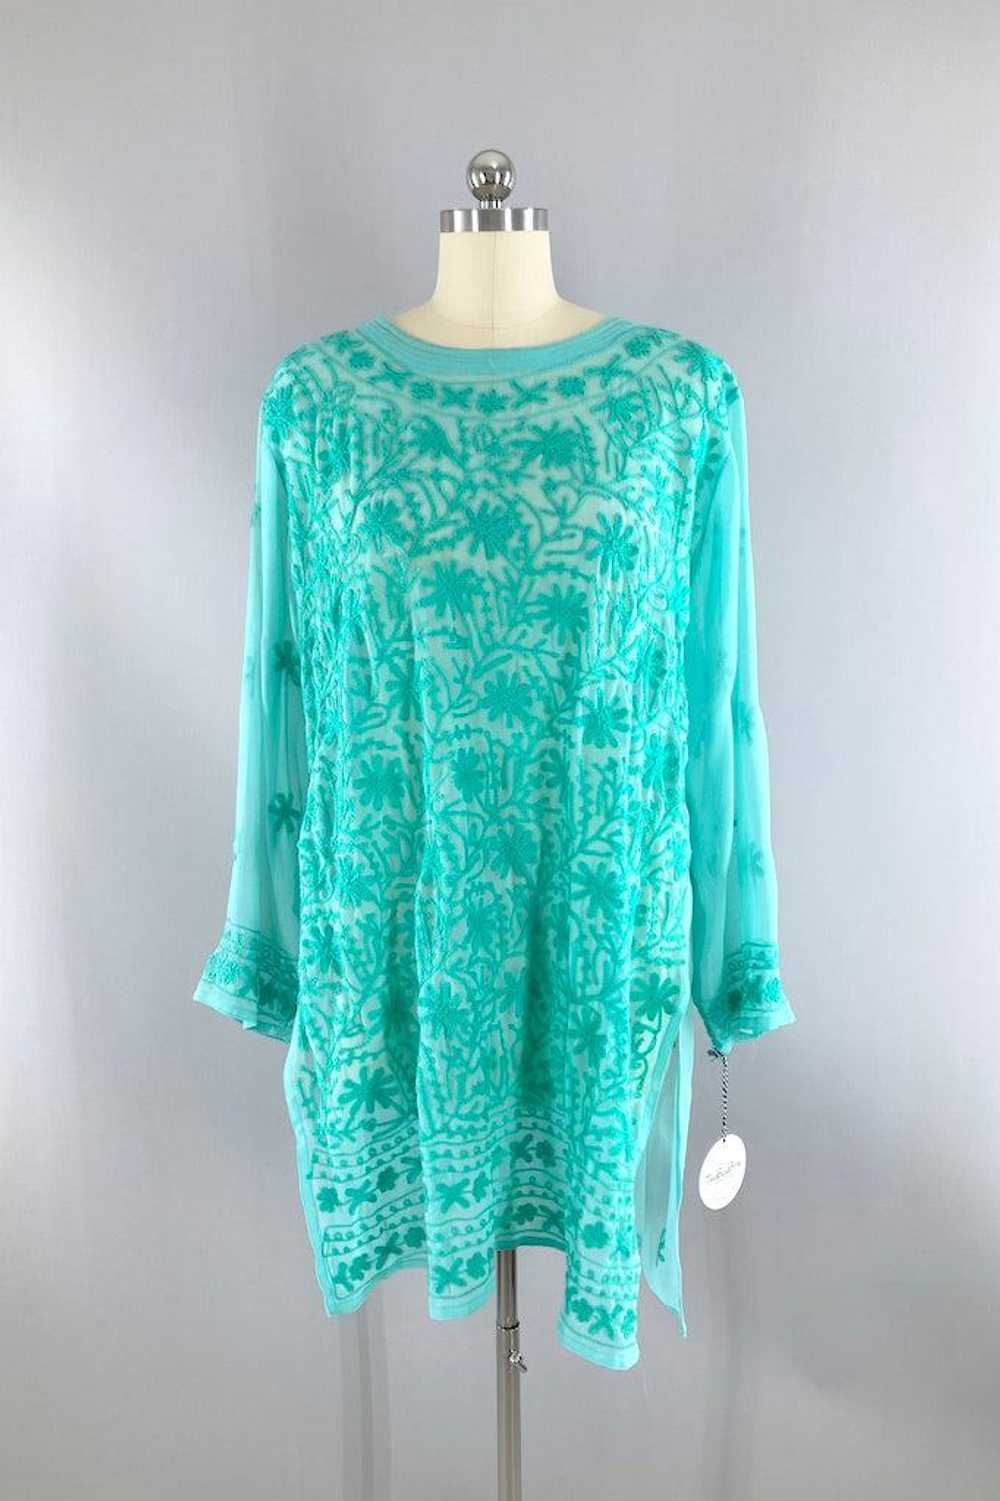 Vintage Embroidered Sheer Tunic - image 1